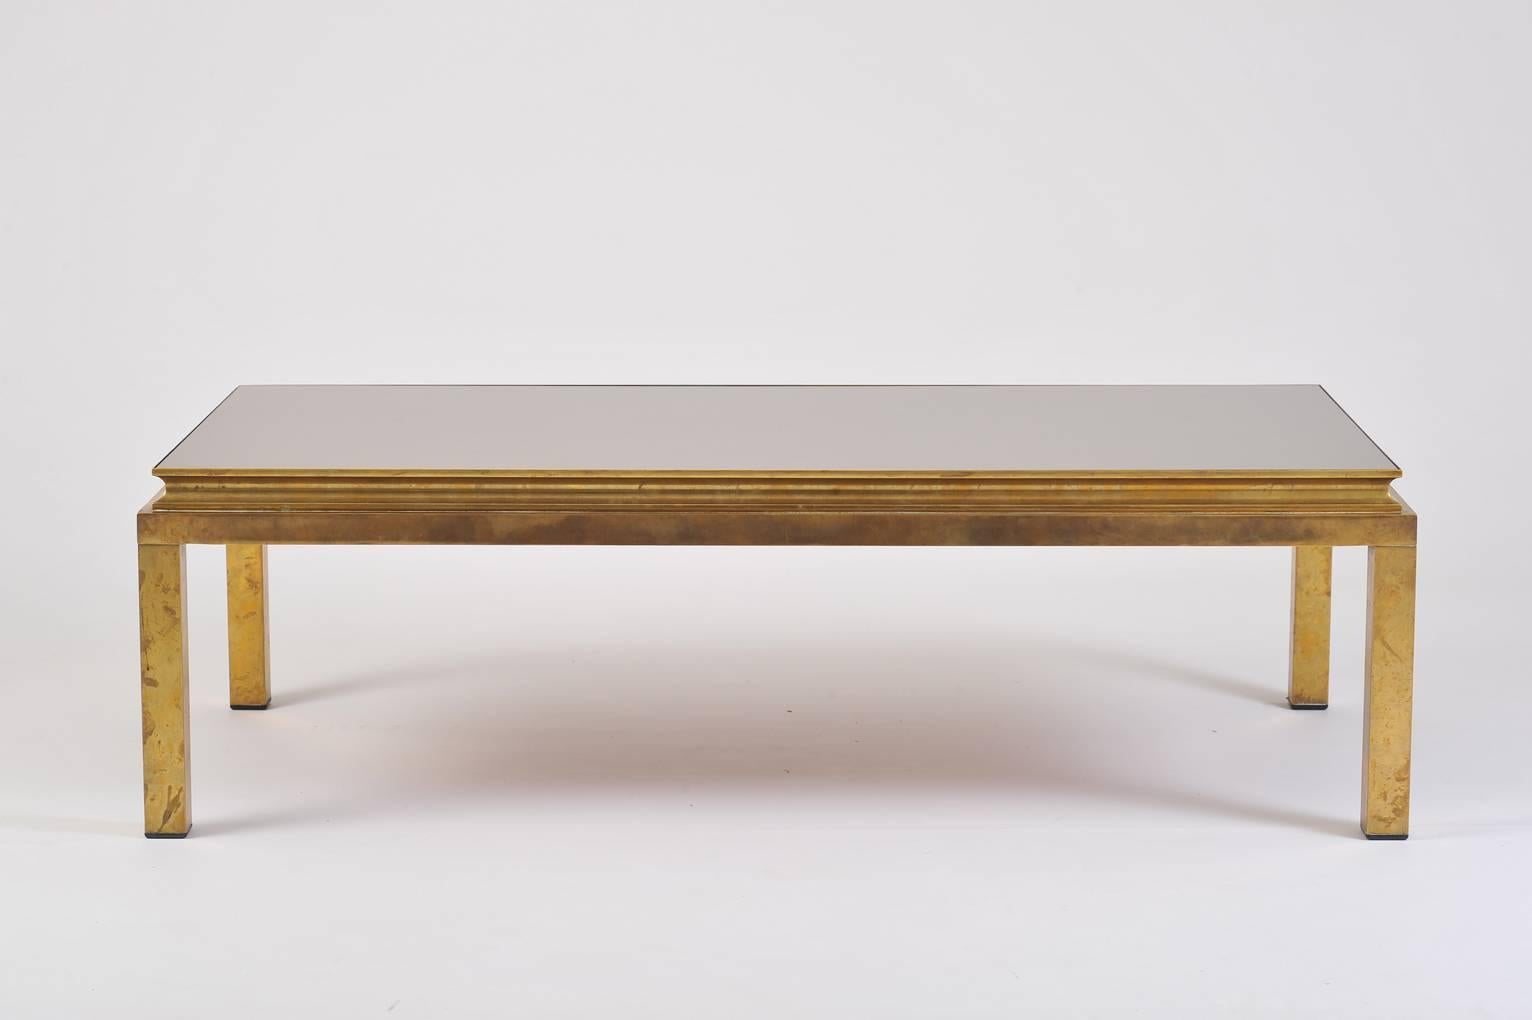 A brass and bronze mirror top rectangular coffee table, in its original patina
France, circa 1970.